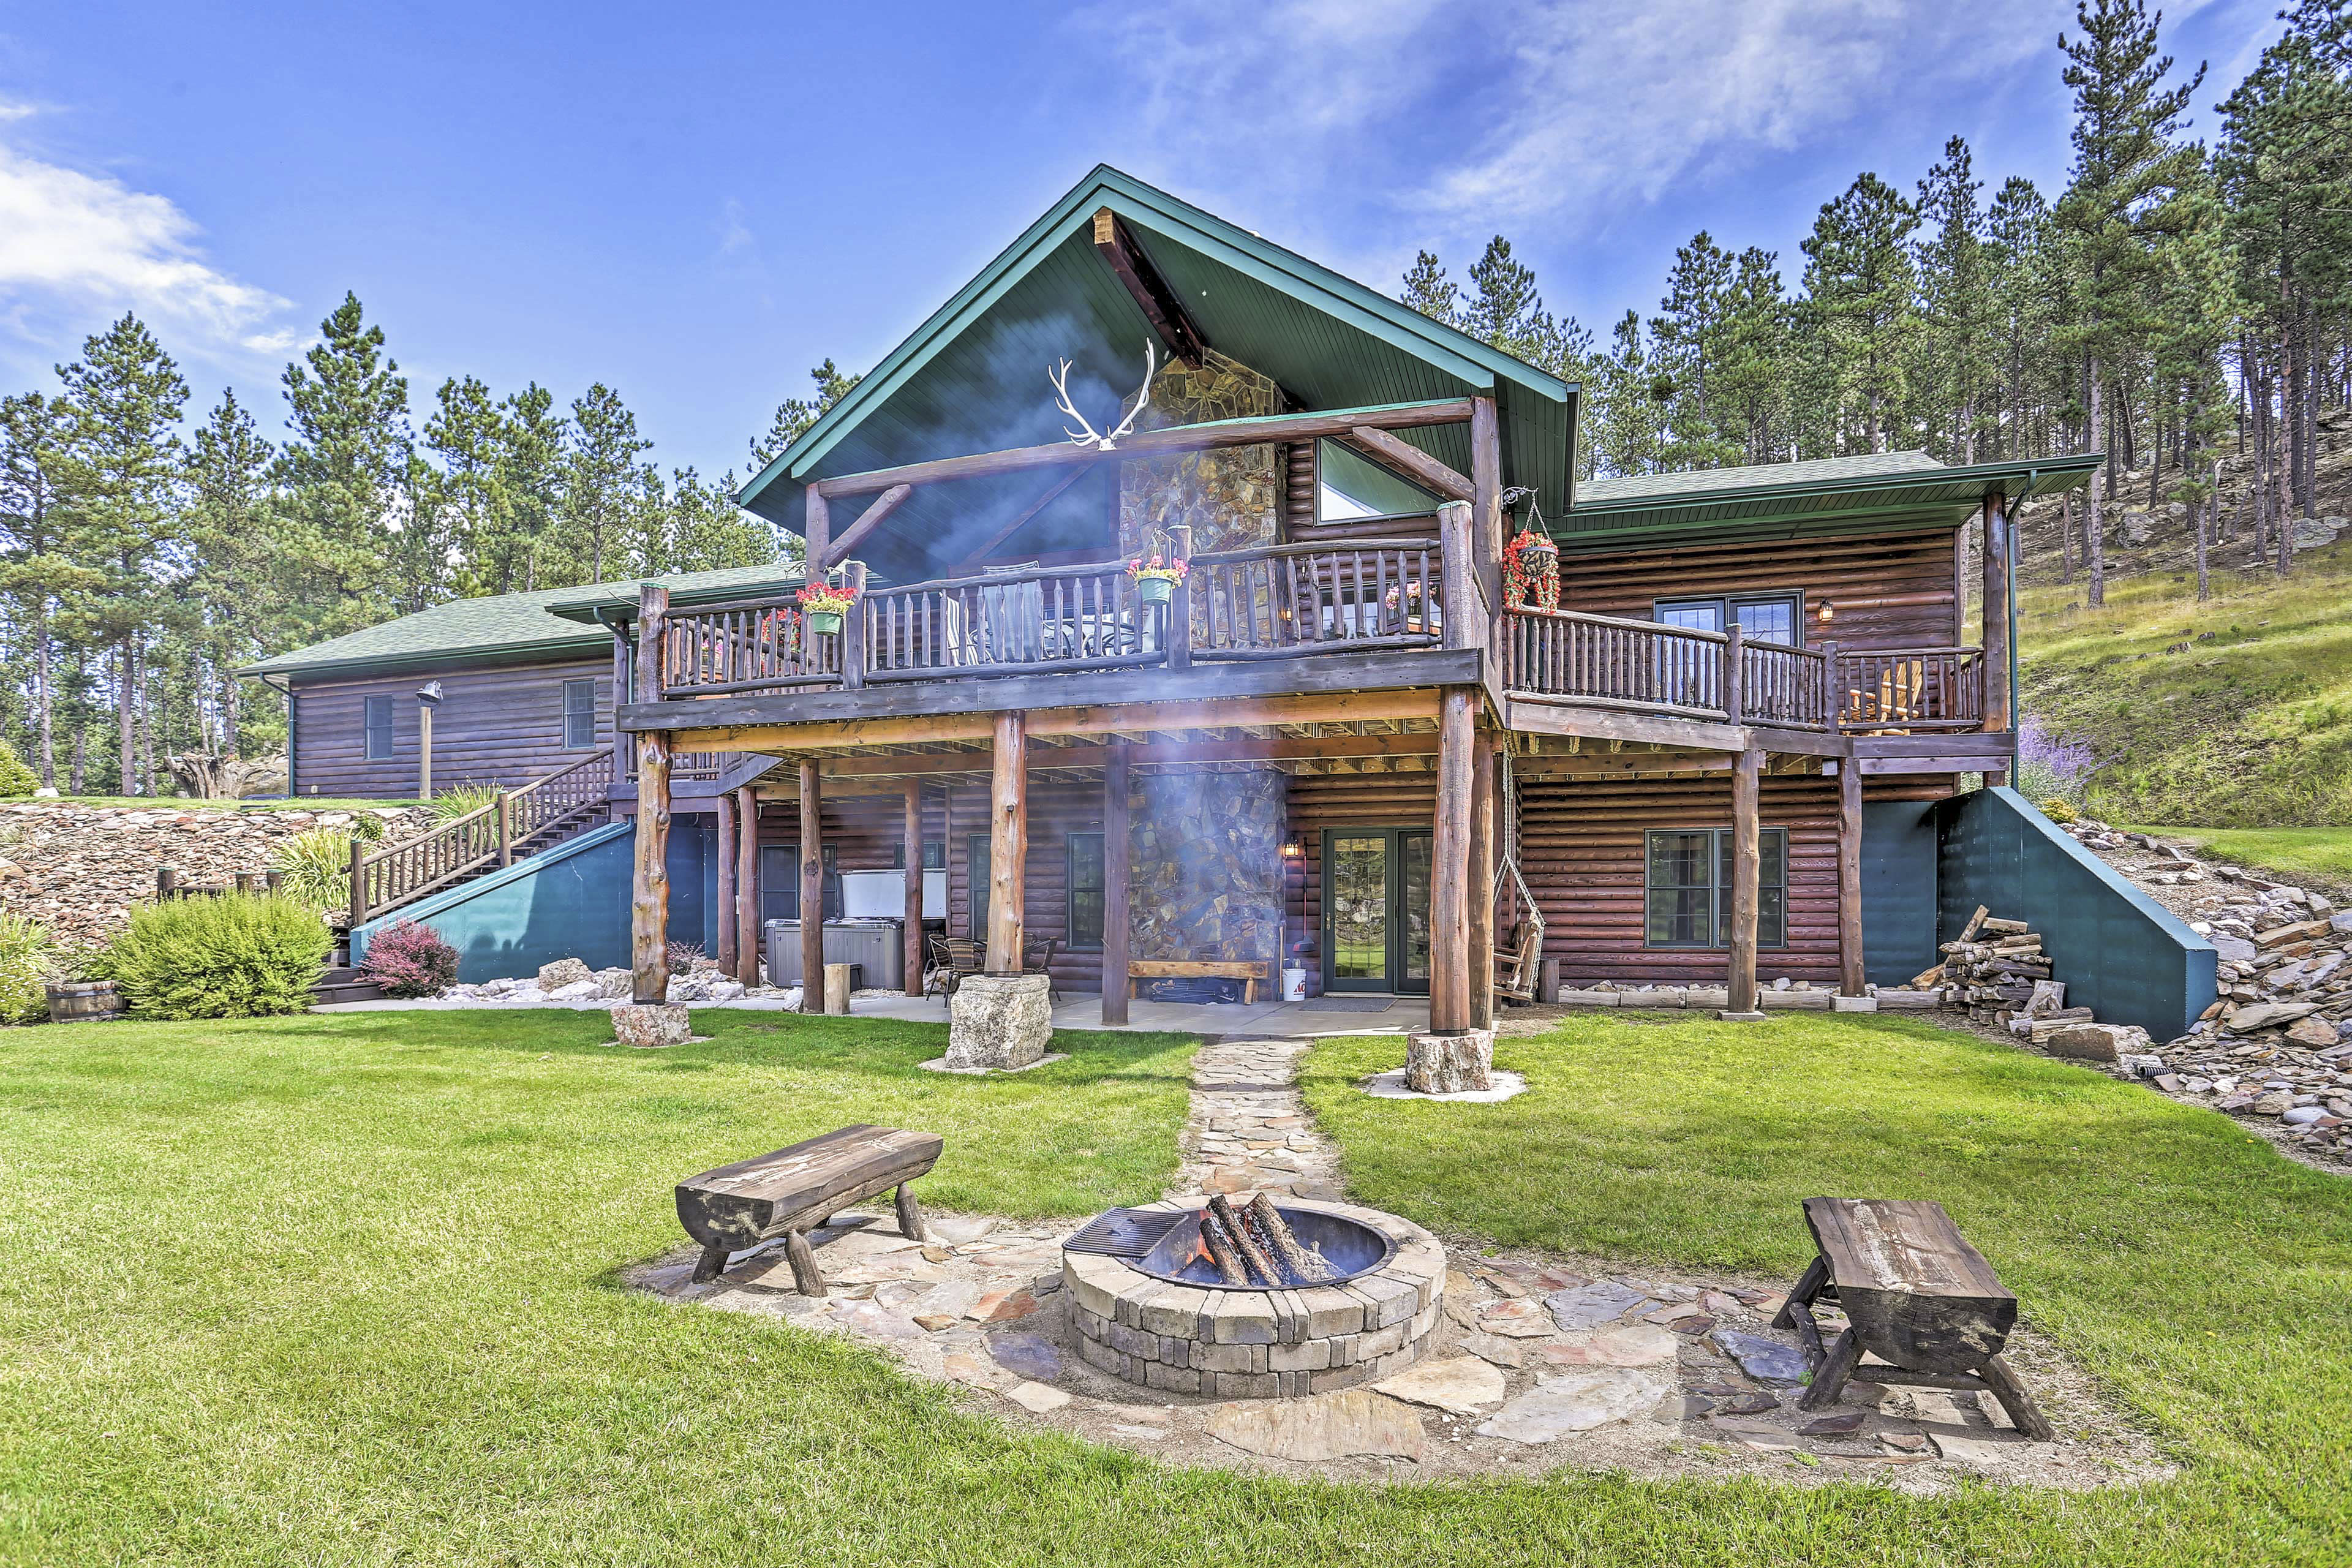 This Custer home boasts 6 bedrooms and 3 bathrooms.